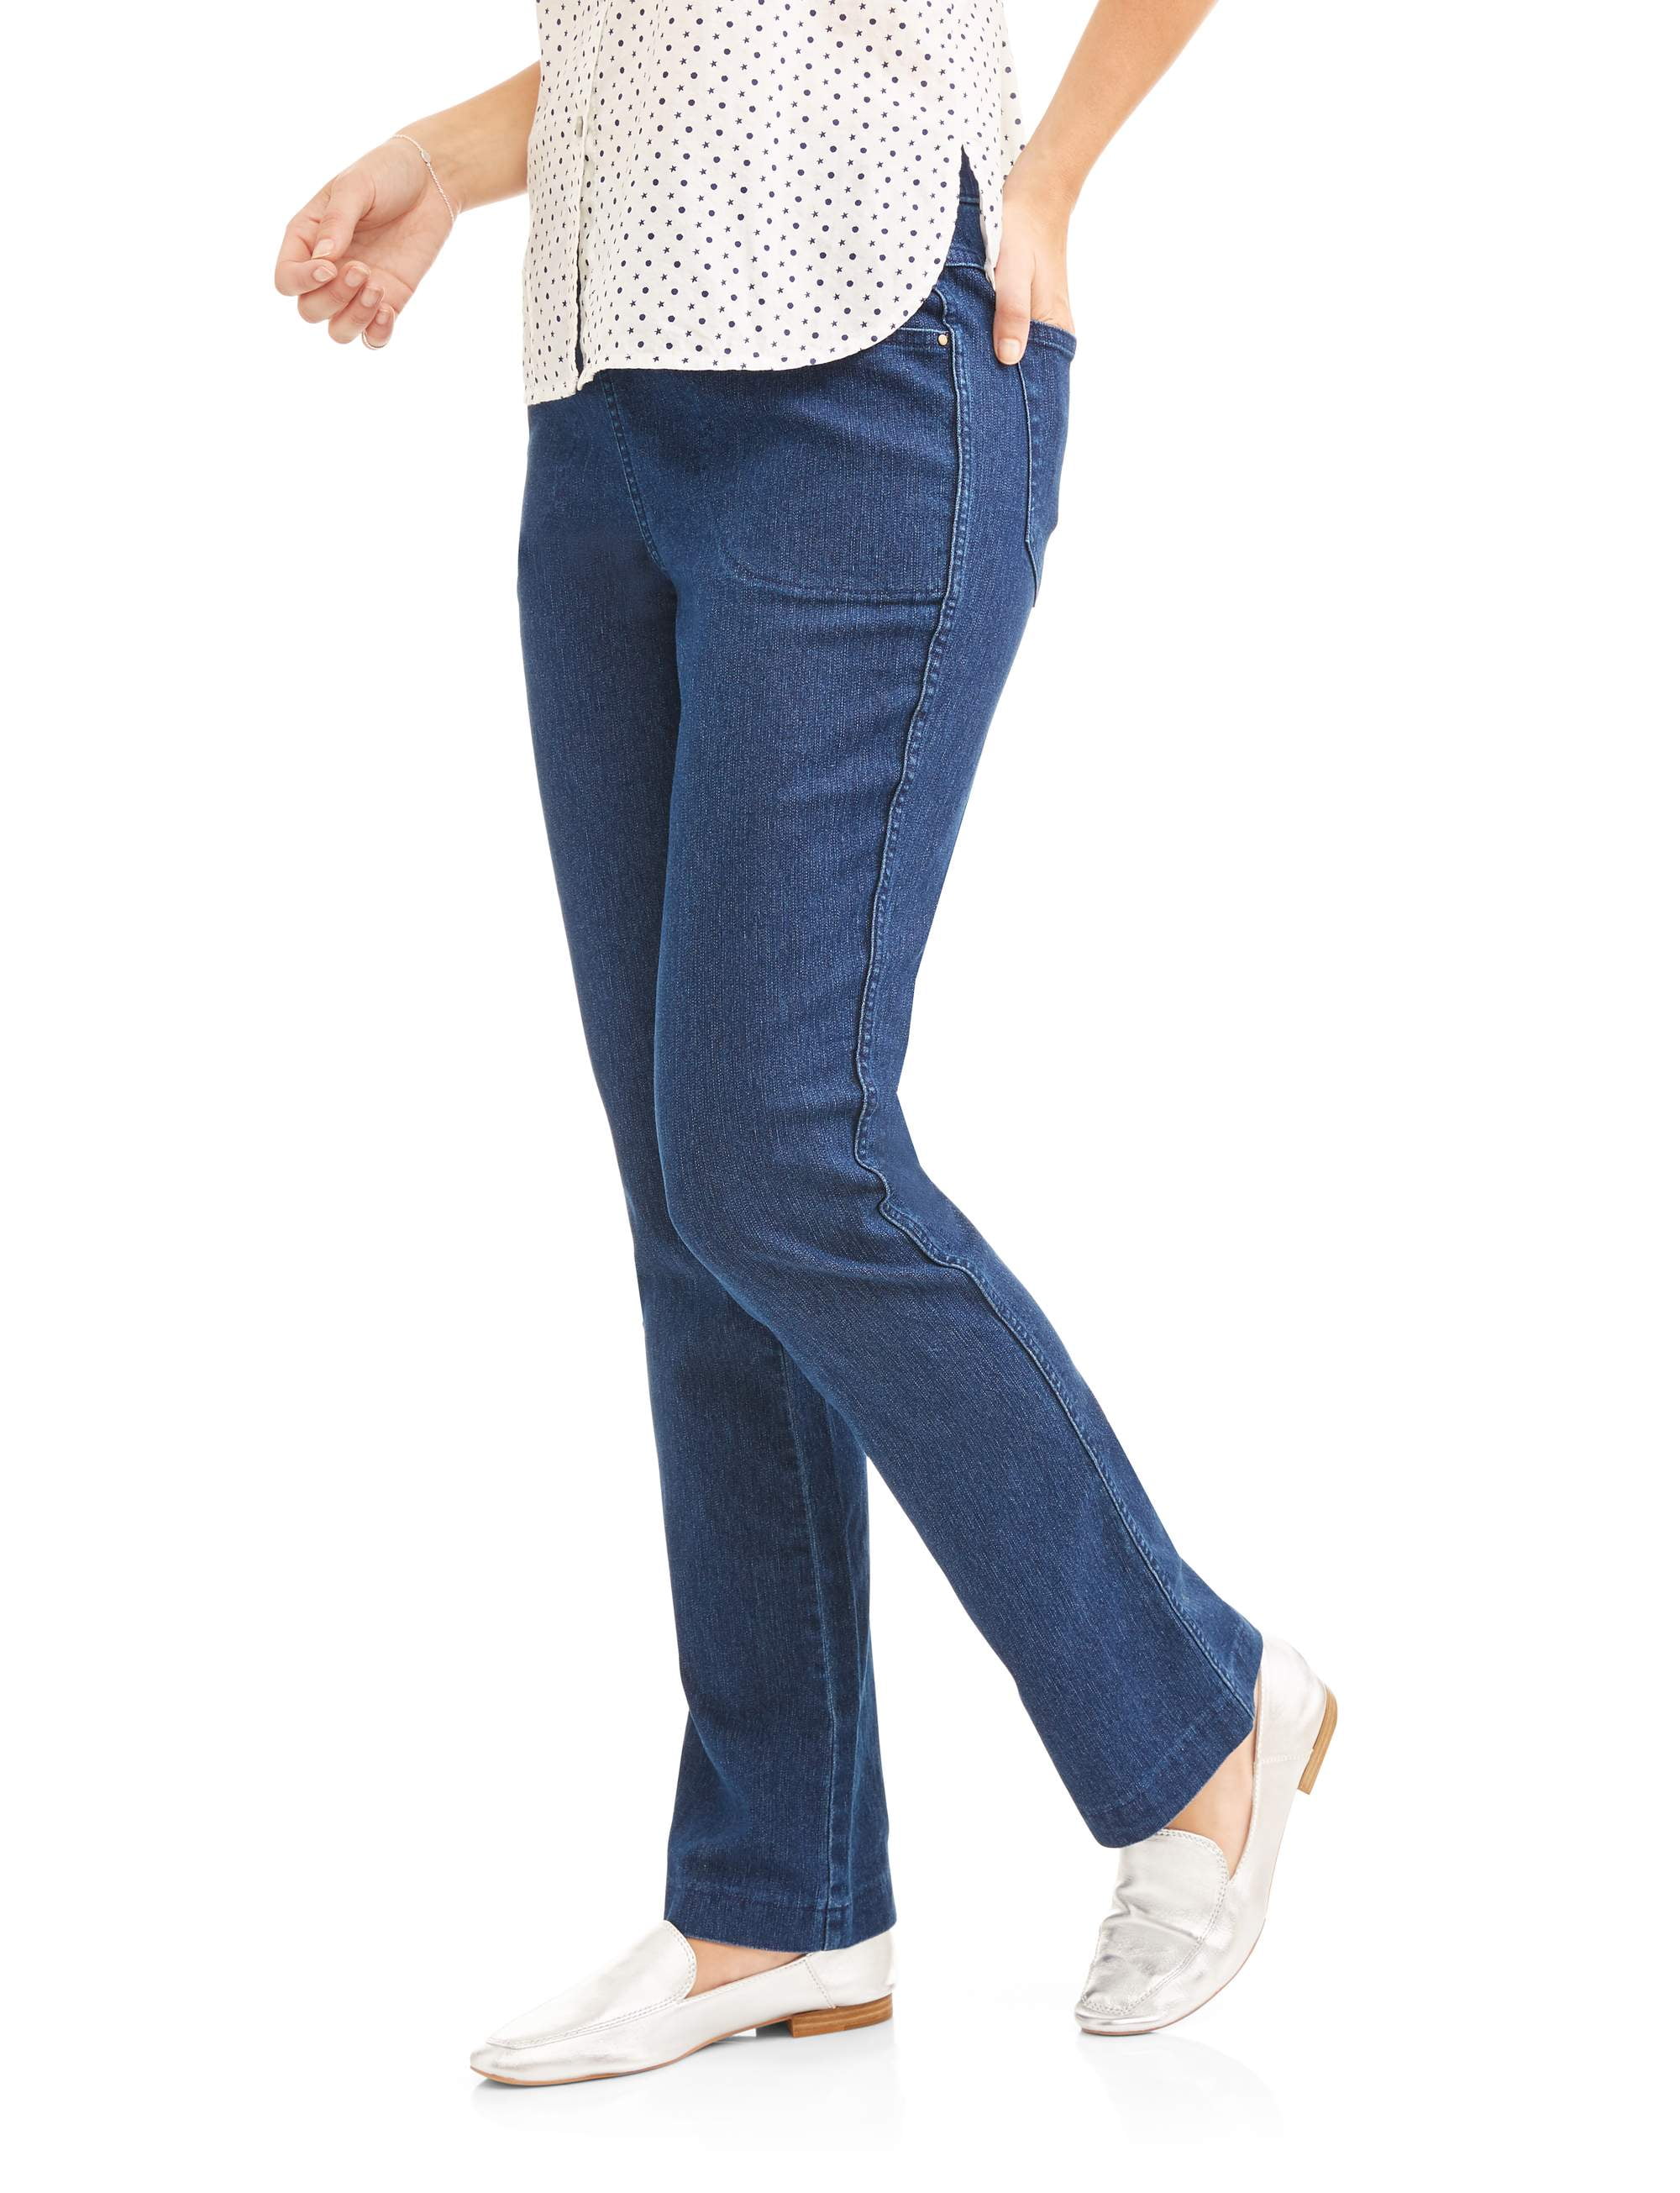 ondanks analyse kloon RealSize Women's 4 Pocket Stretch Pull On Bootcut Jeans, Sizes S-XXL,  Available in Petite - Walmart.com